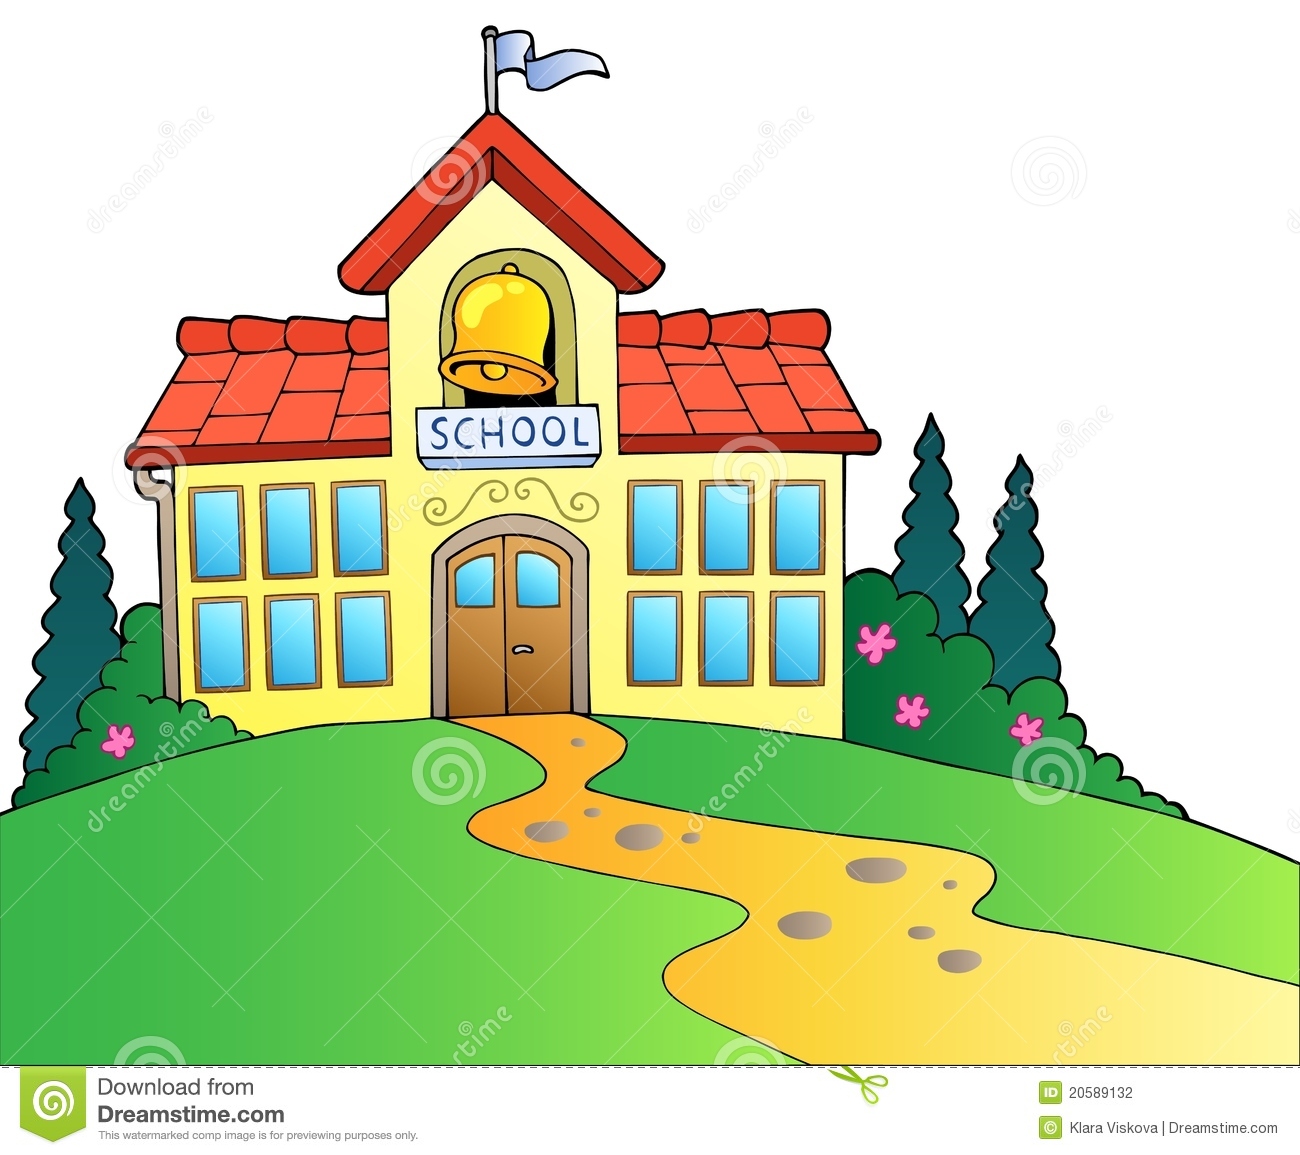 College Building Clipart   Clipart Panda   Free Clipart Images